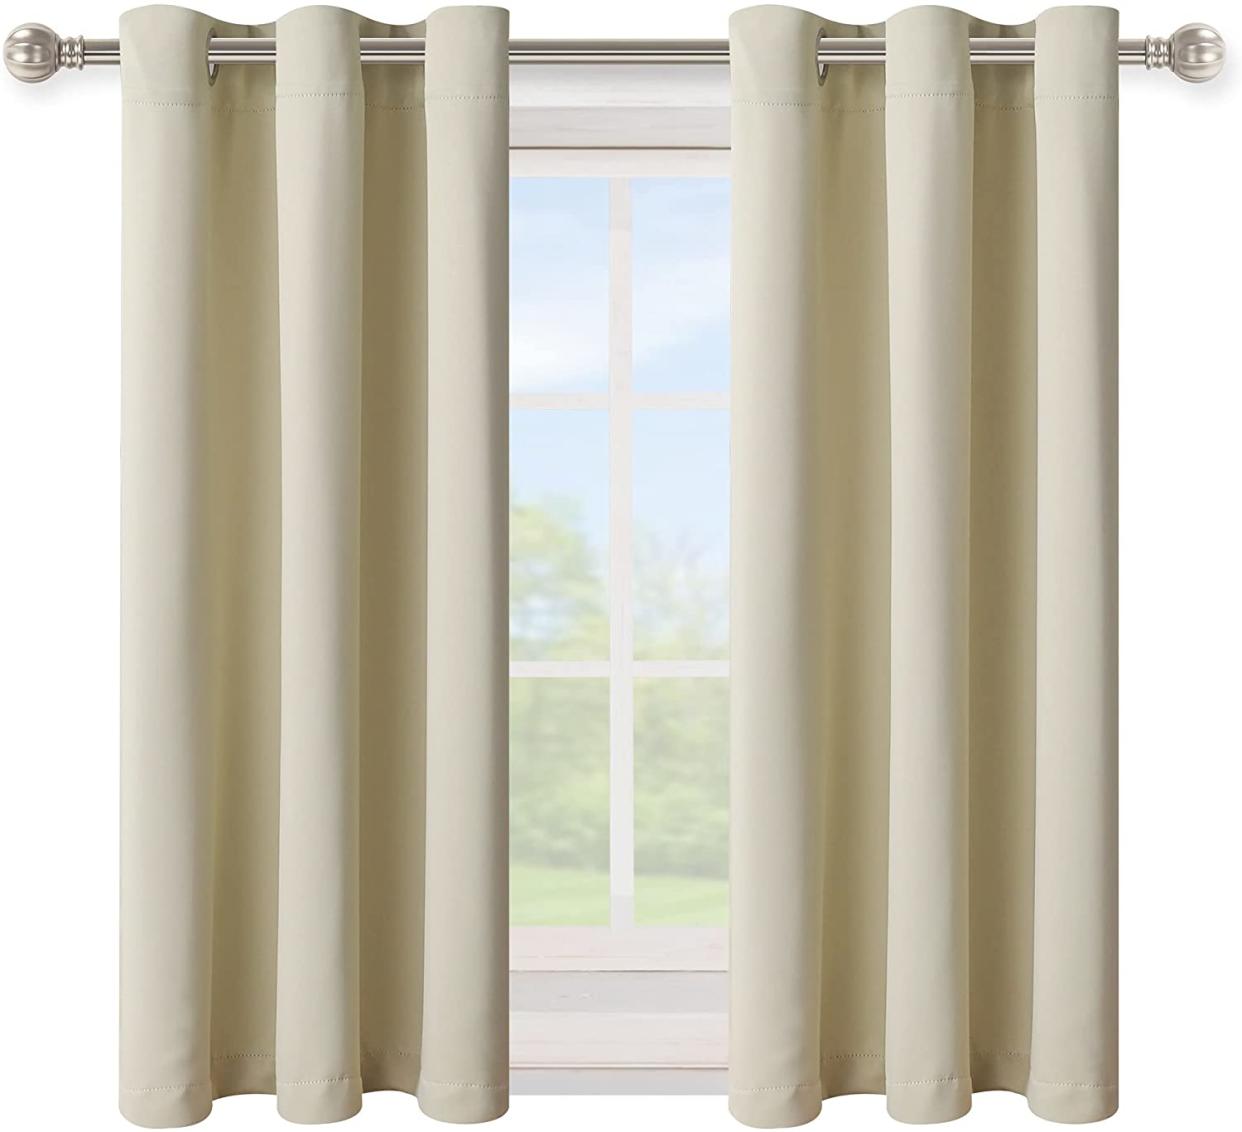 Get a better night's sleep with these drapes. (Photo: Amazon)